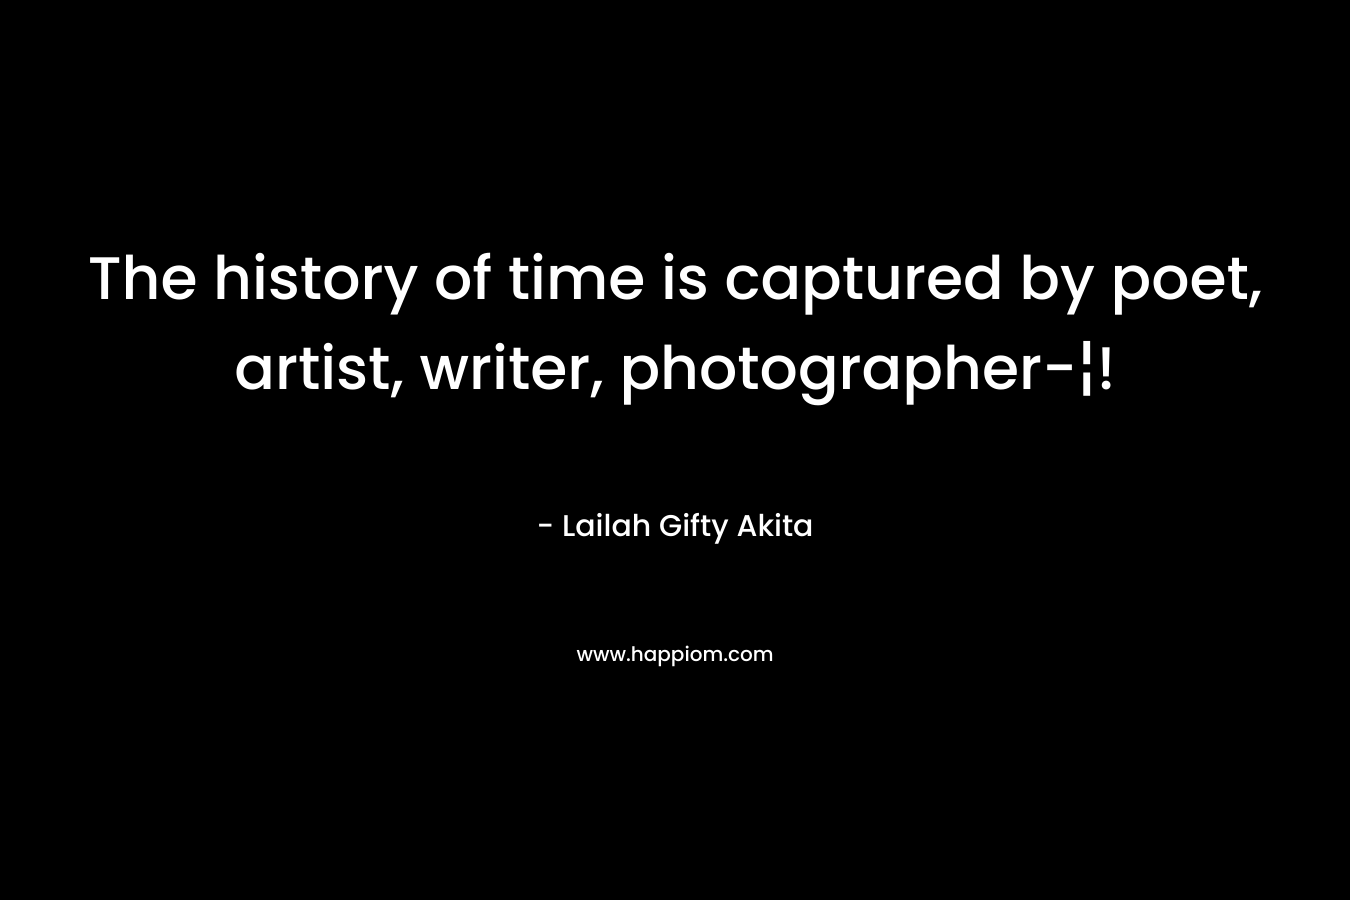 The history of time is captured by poet, artist, writer, photographer-¦! – Lailah Gifty Akita